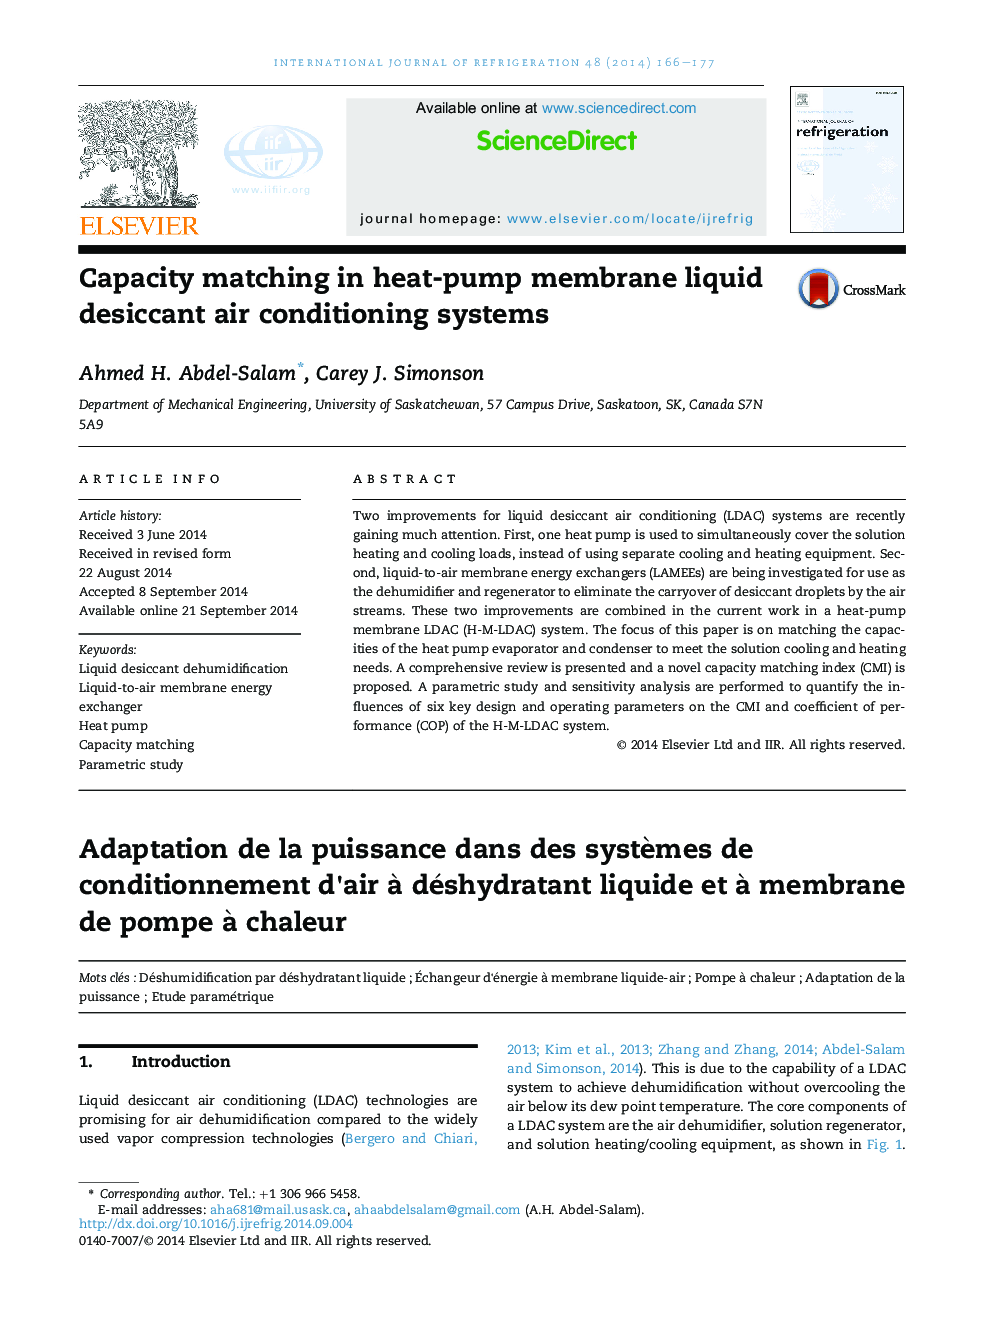 Capacity matching in heat-pump membrane liquid desiccant air conditioning systems